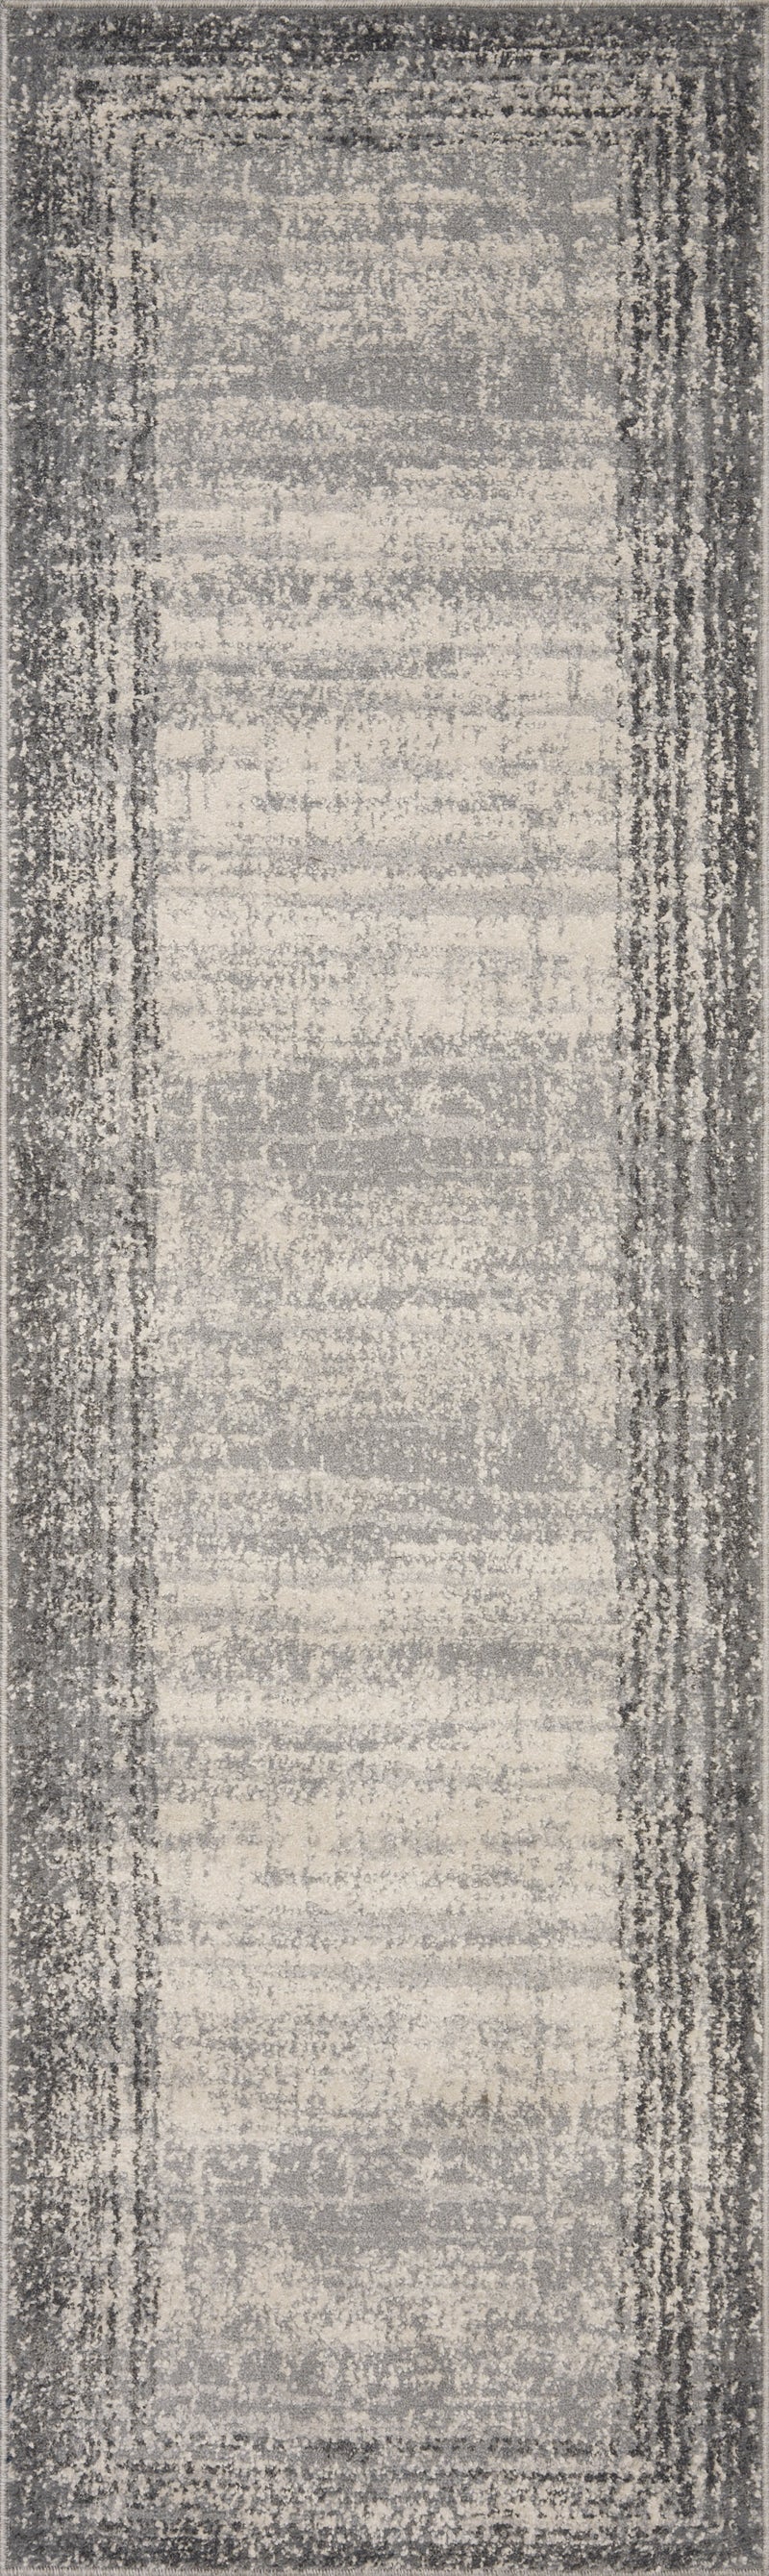 media image for Austen Rug in Pebble / Charcoal by Loloi II 219